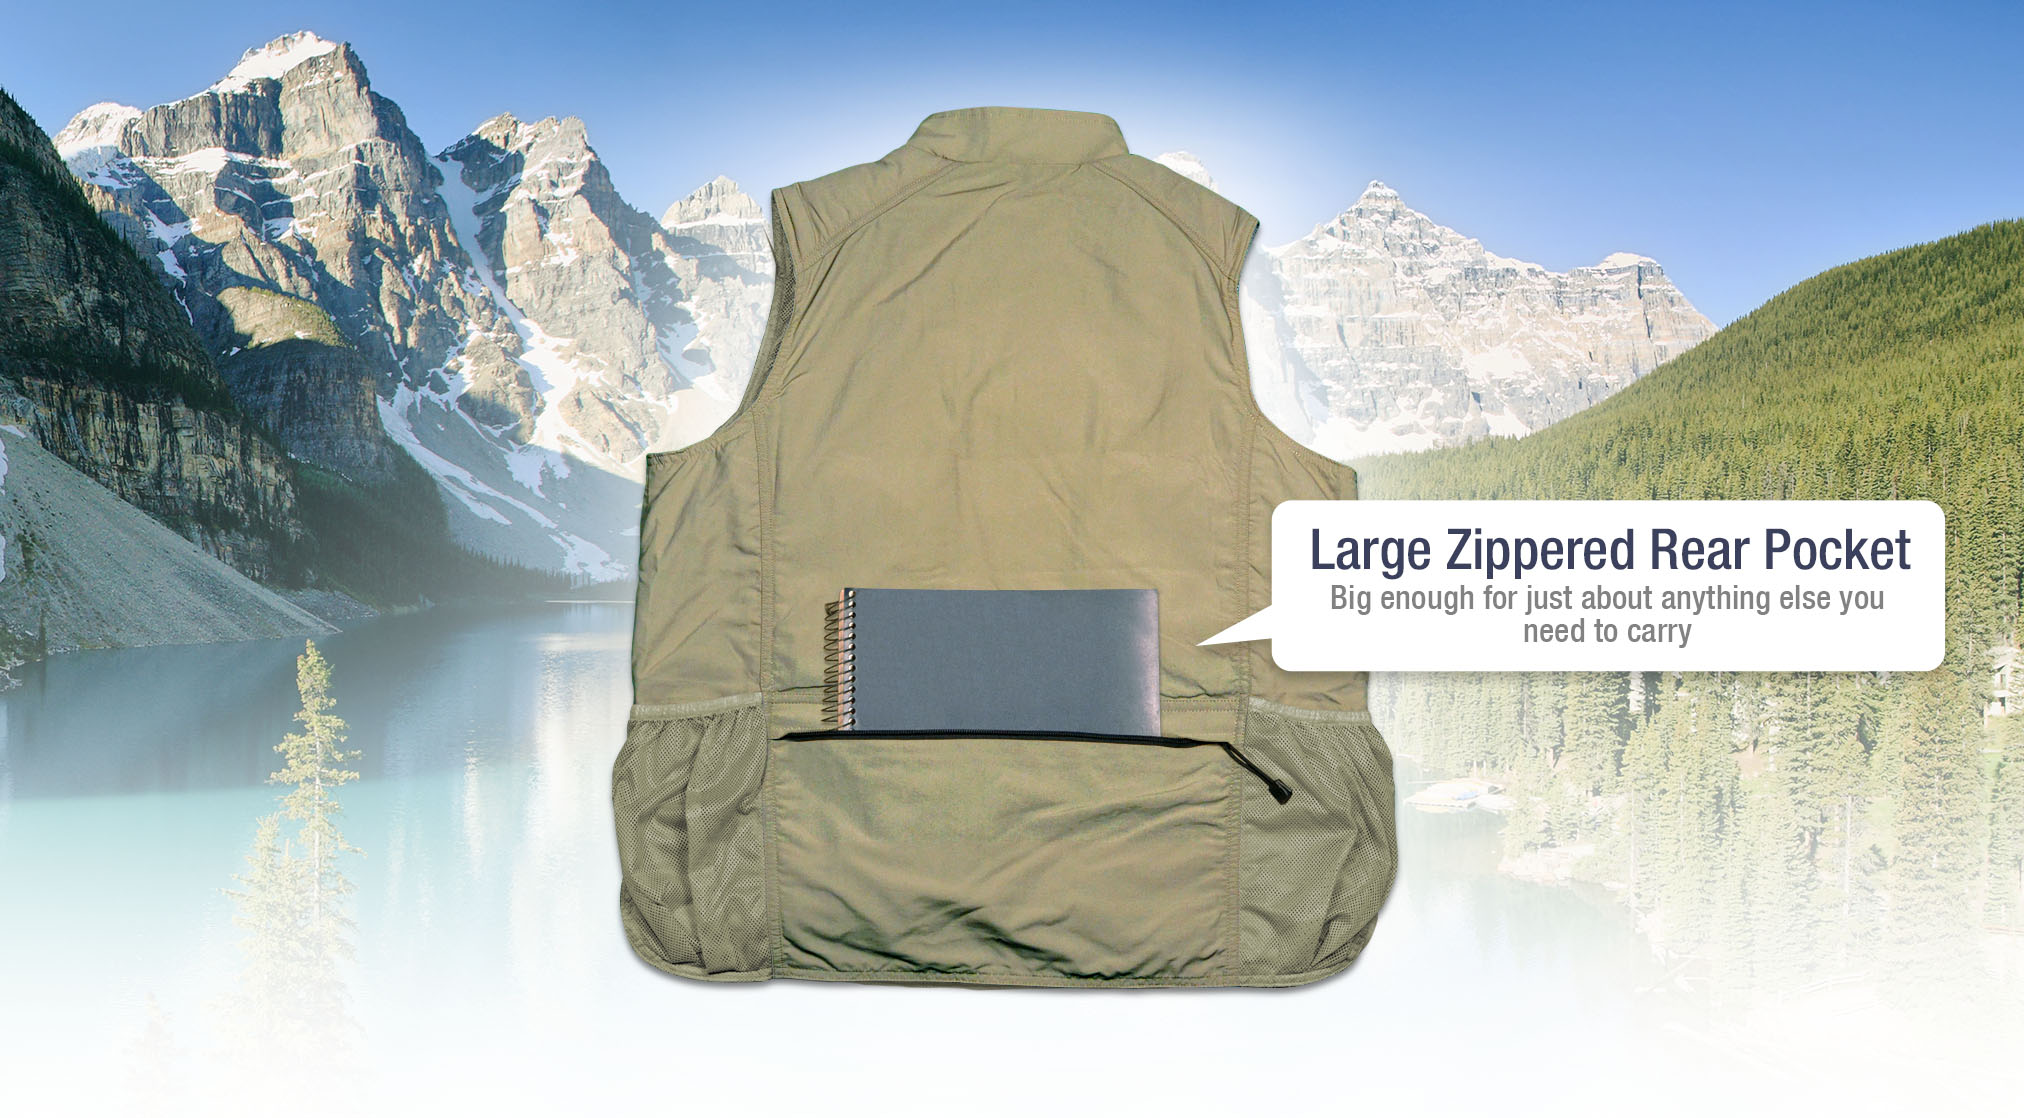 Large Zippered Rear Pocket big enough for just about anything else you need to carry